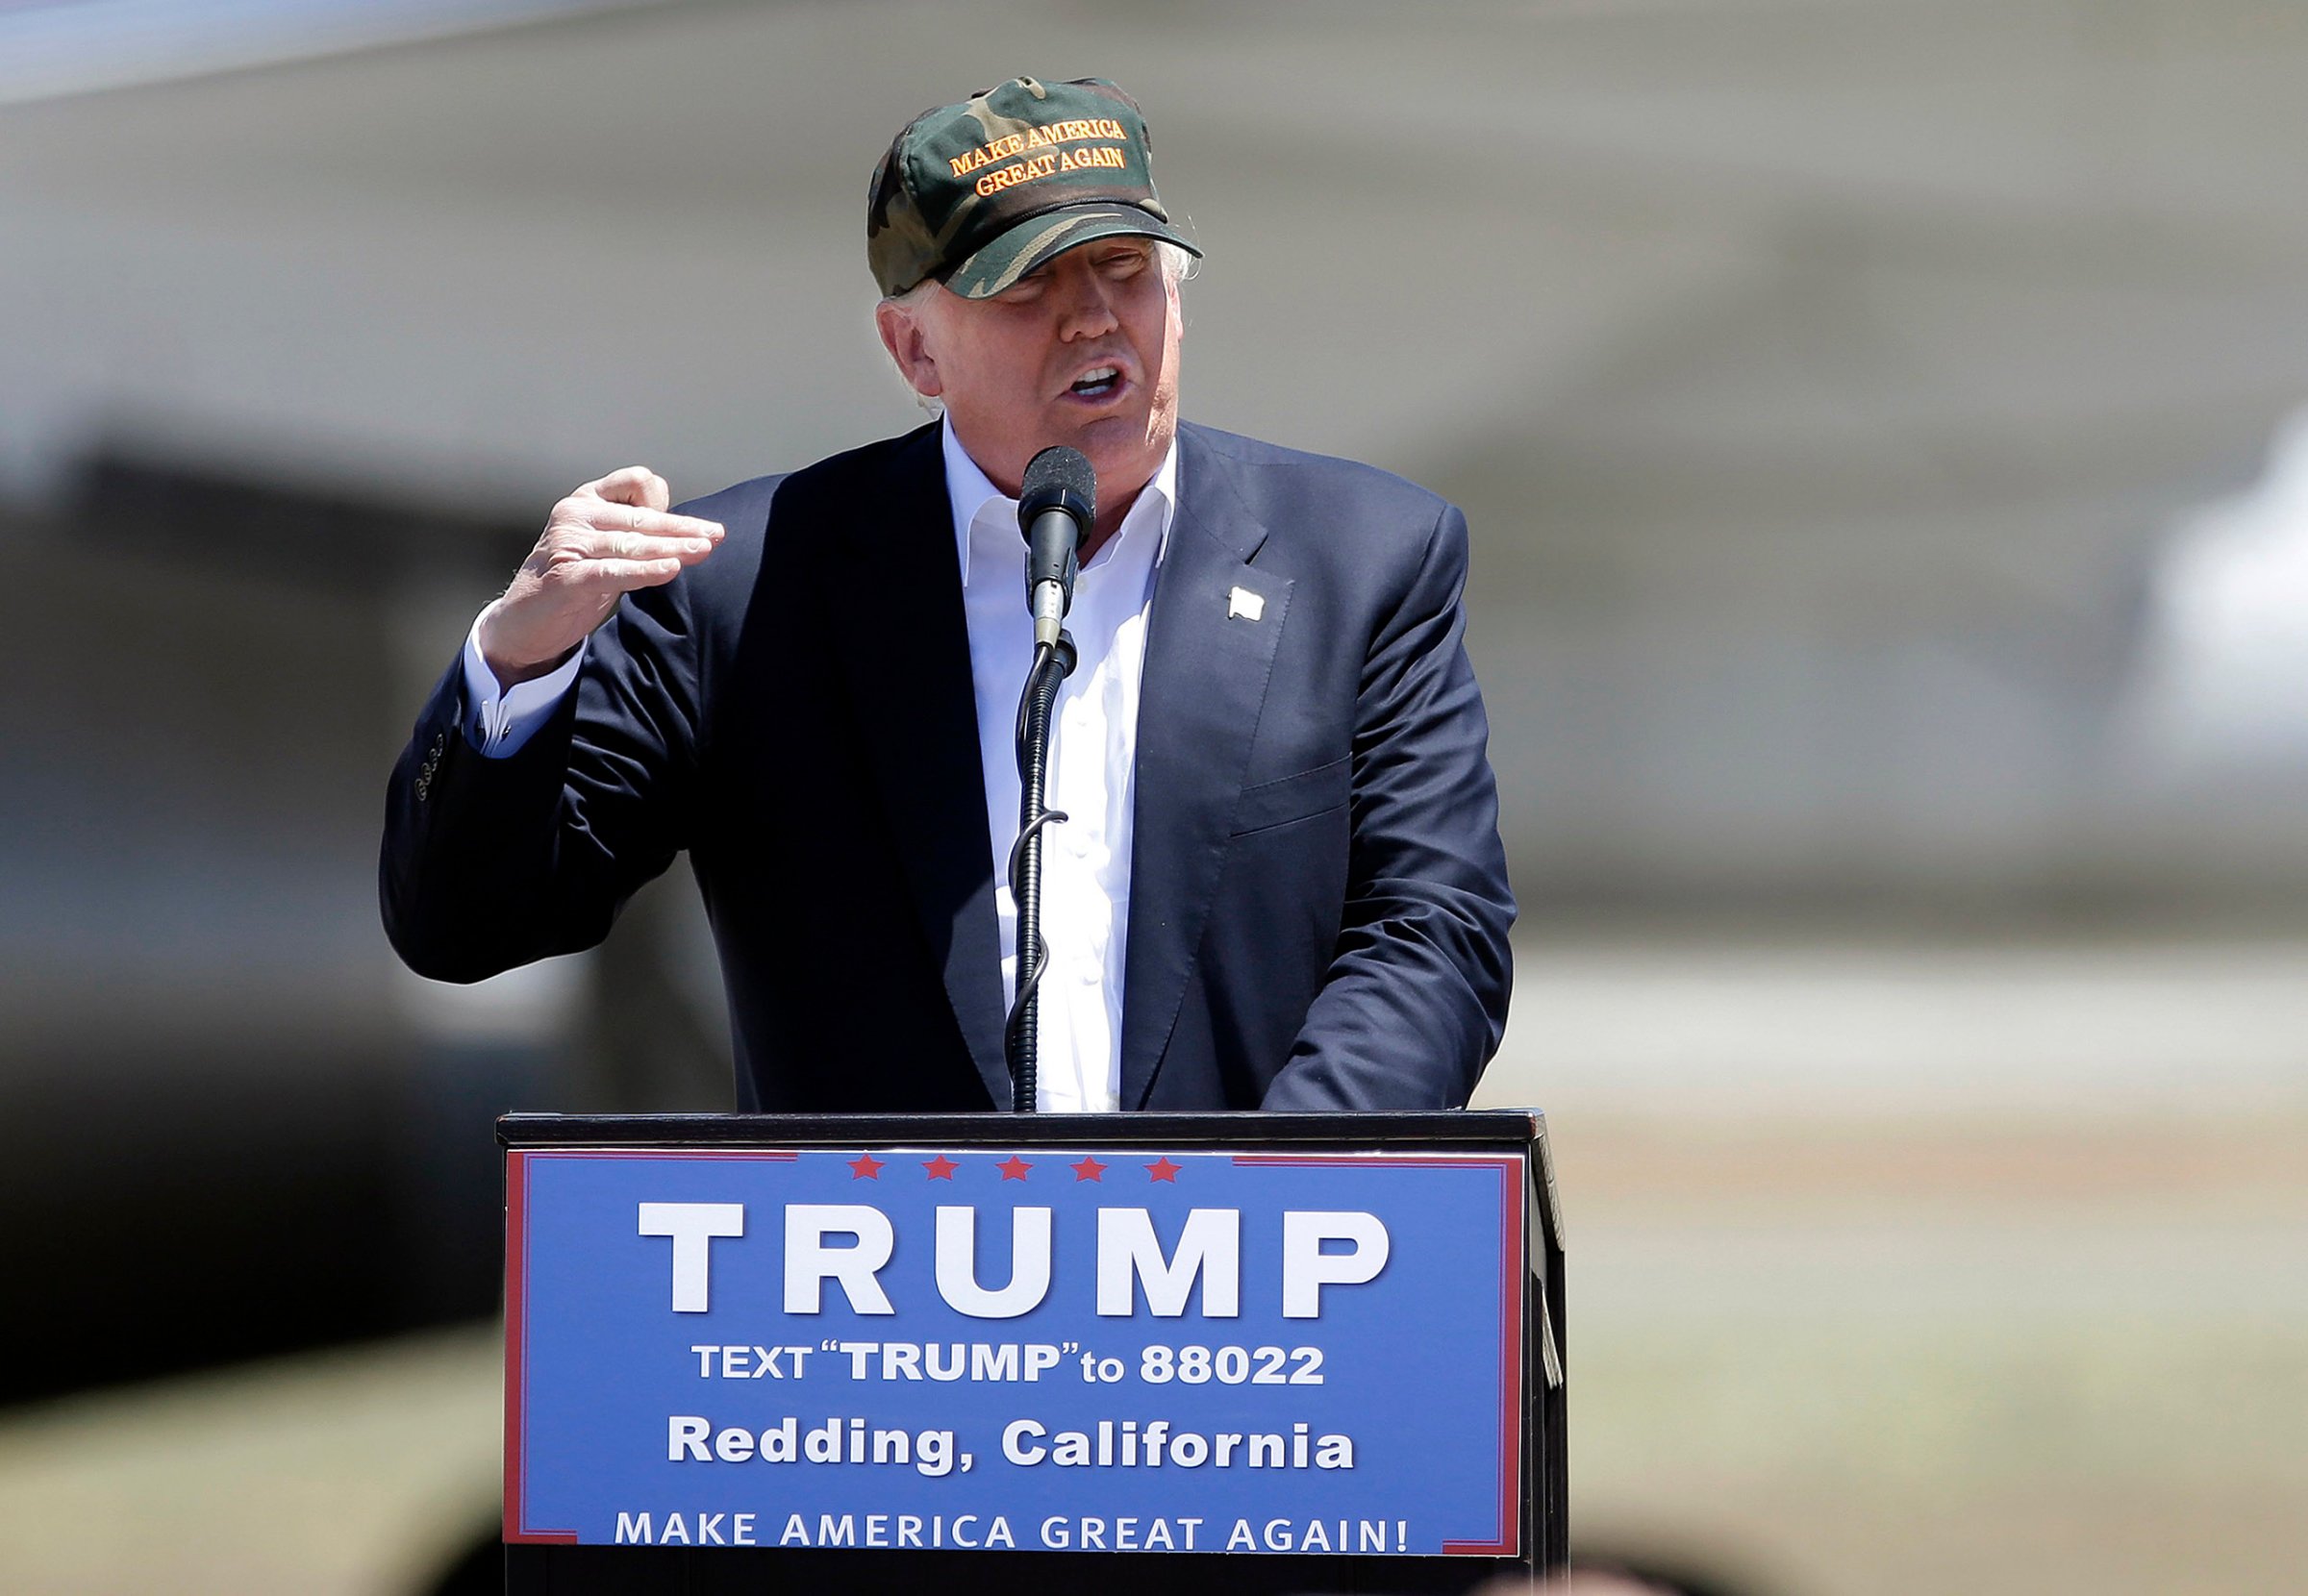 Donald Trump speaks at a campaign rally at the Redding Municipal Airport in Calif., June 3, 2016.